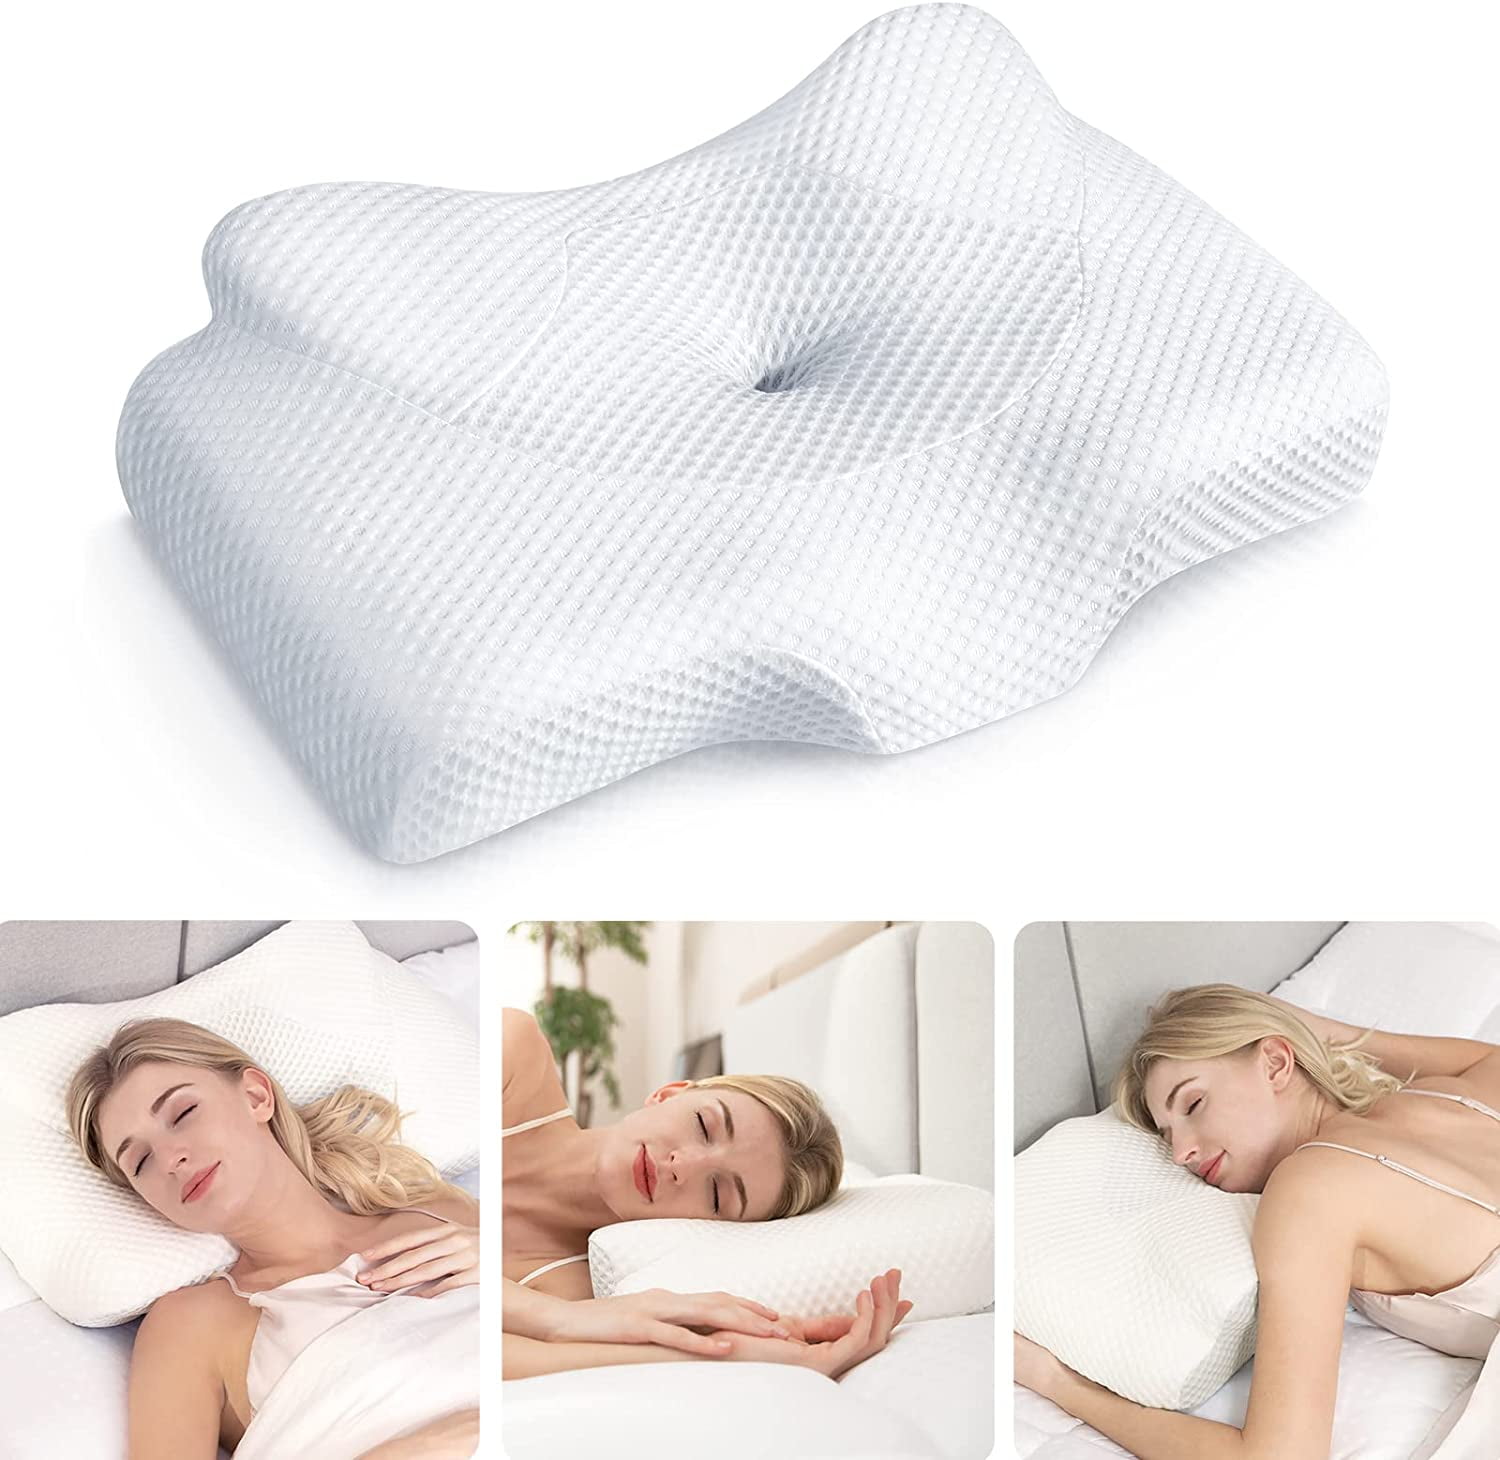 Queen Size Contour Memory Foam Pillow Great for Relieving Neck and Shoulder Q18 